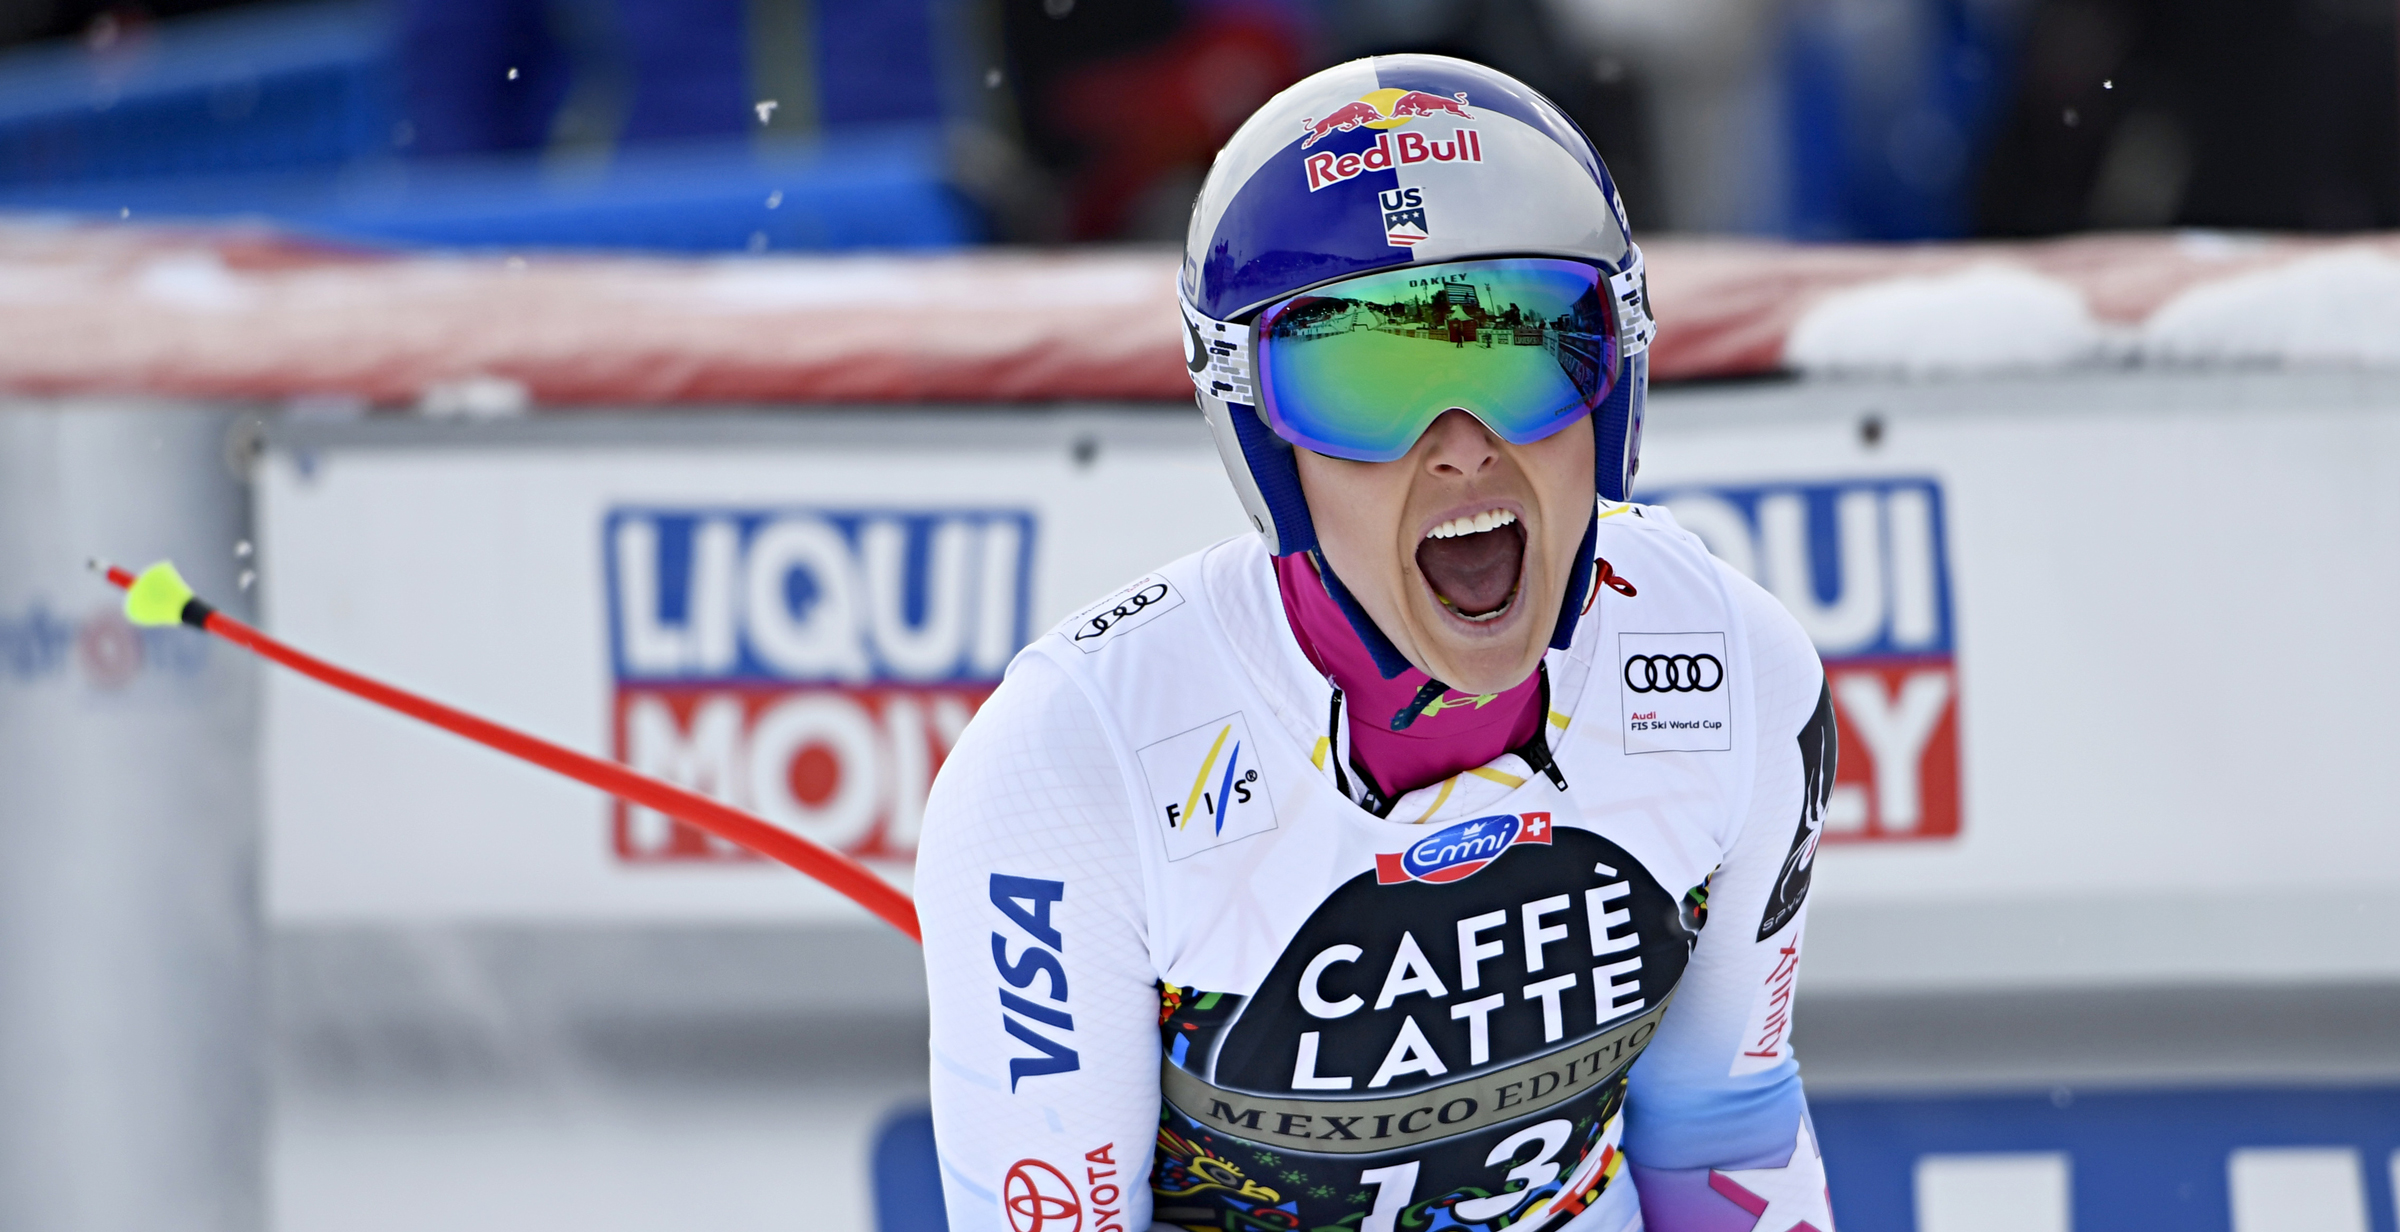 Lindsey Vonn celebrates her 82nd World Cup victory Wednesday in Are, Sweden. (Getty Images/Agence Zoom – Alain Grosclaude)